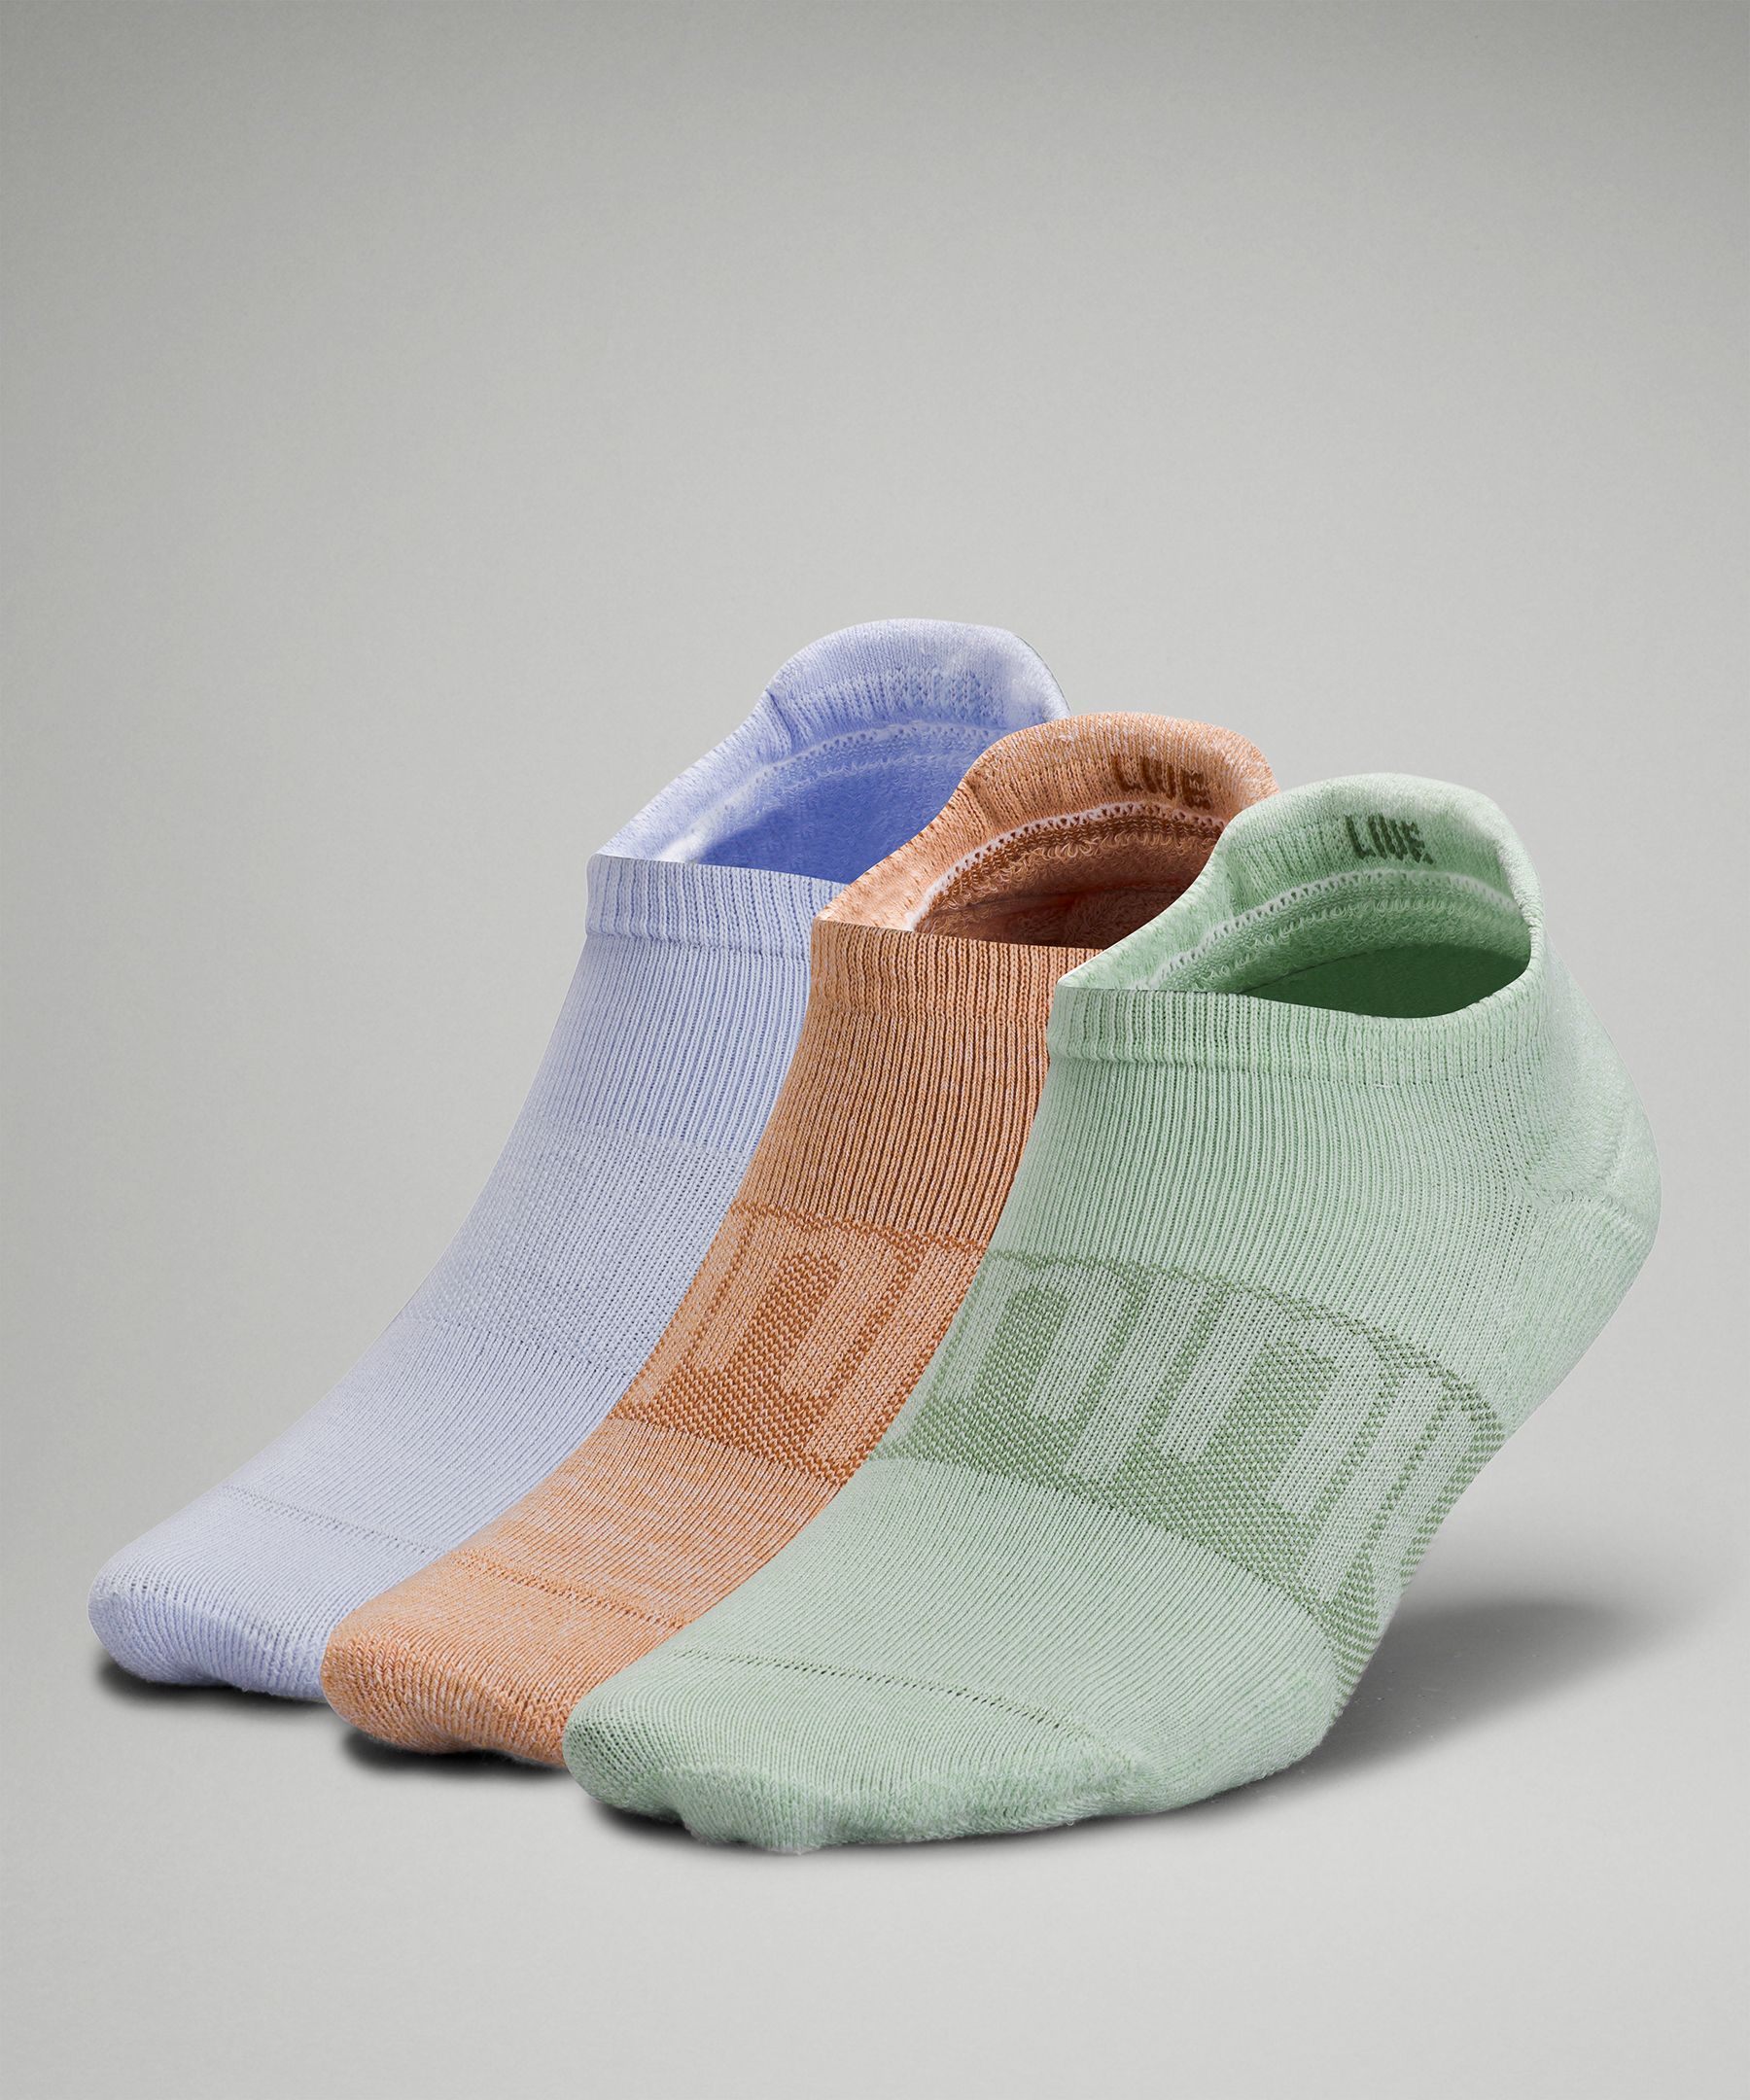 Lululemon Daily Stride Low-ankle Socks 3 Pack In Creamy Mint/warm Apricot/pastel Blue